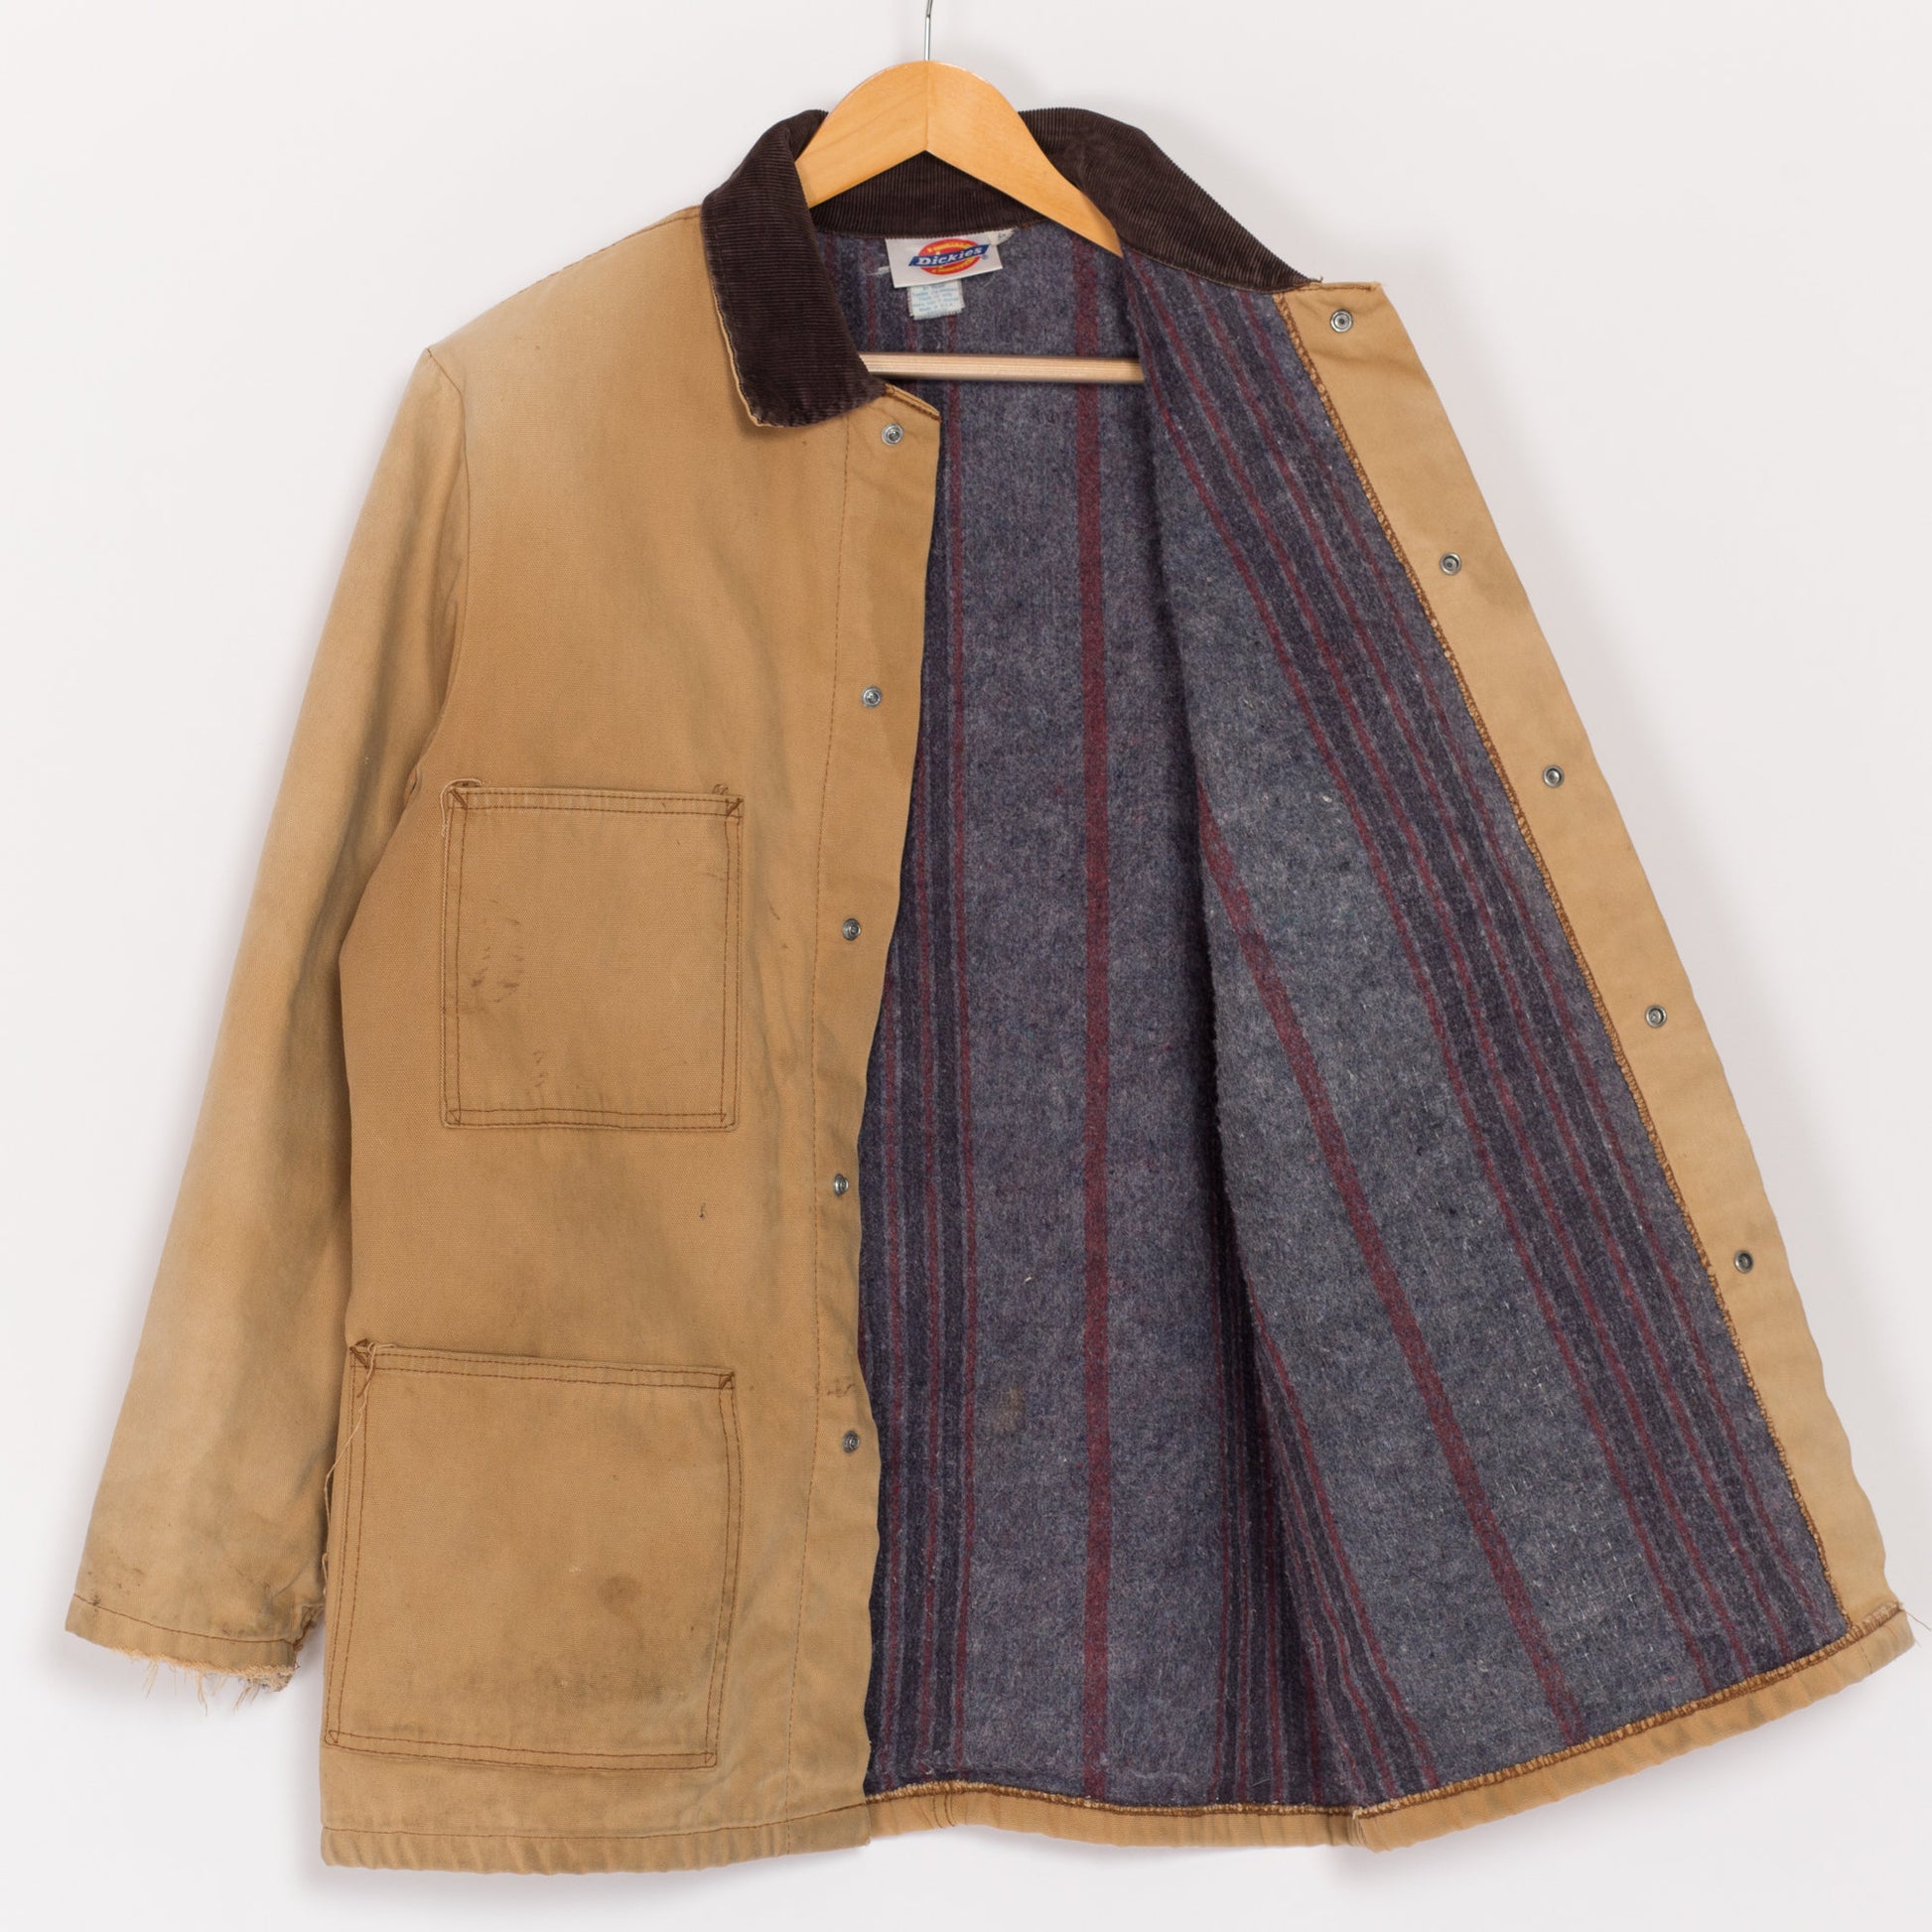 Medium 90s Dickies Canvas Blanket Lined Chore Coat Size 40 | Vintage Made In USA Tan Duck Corduroy Collar Workwear Jacket